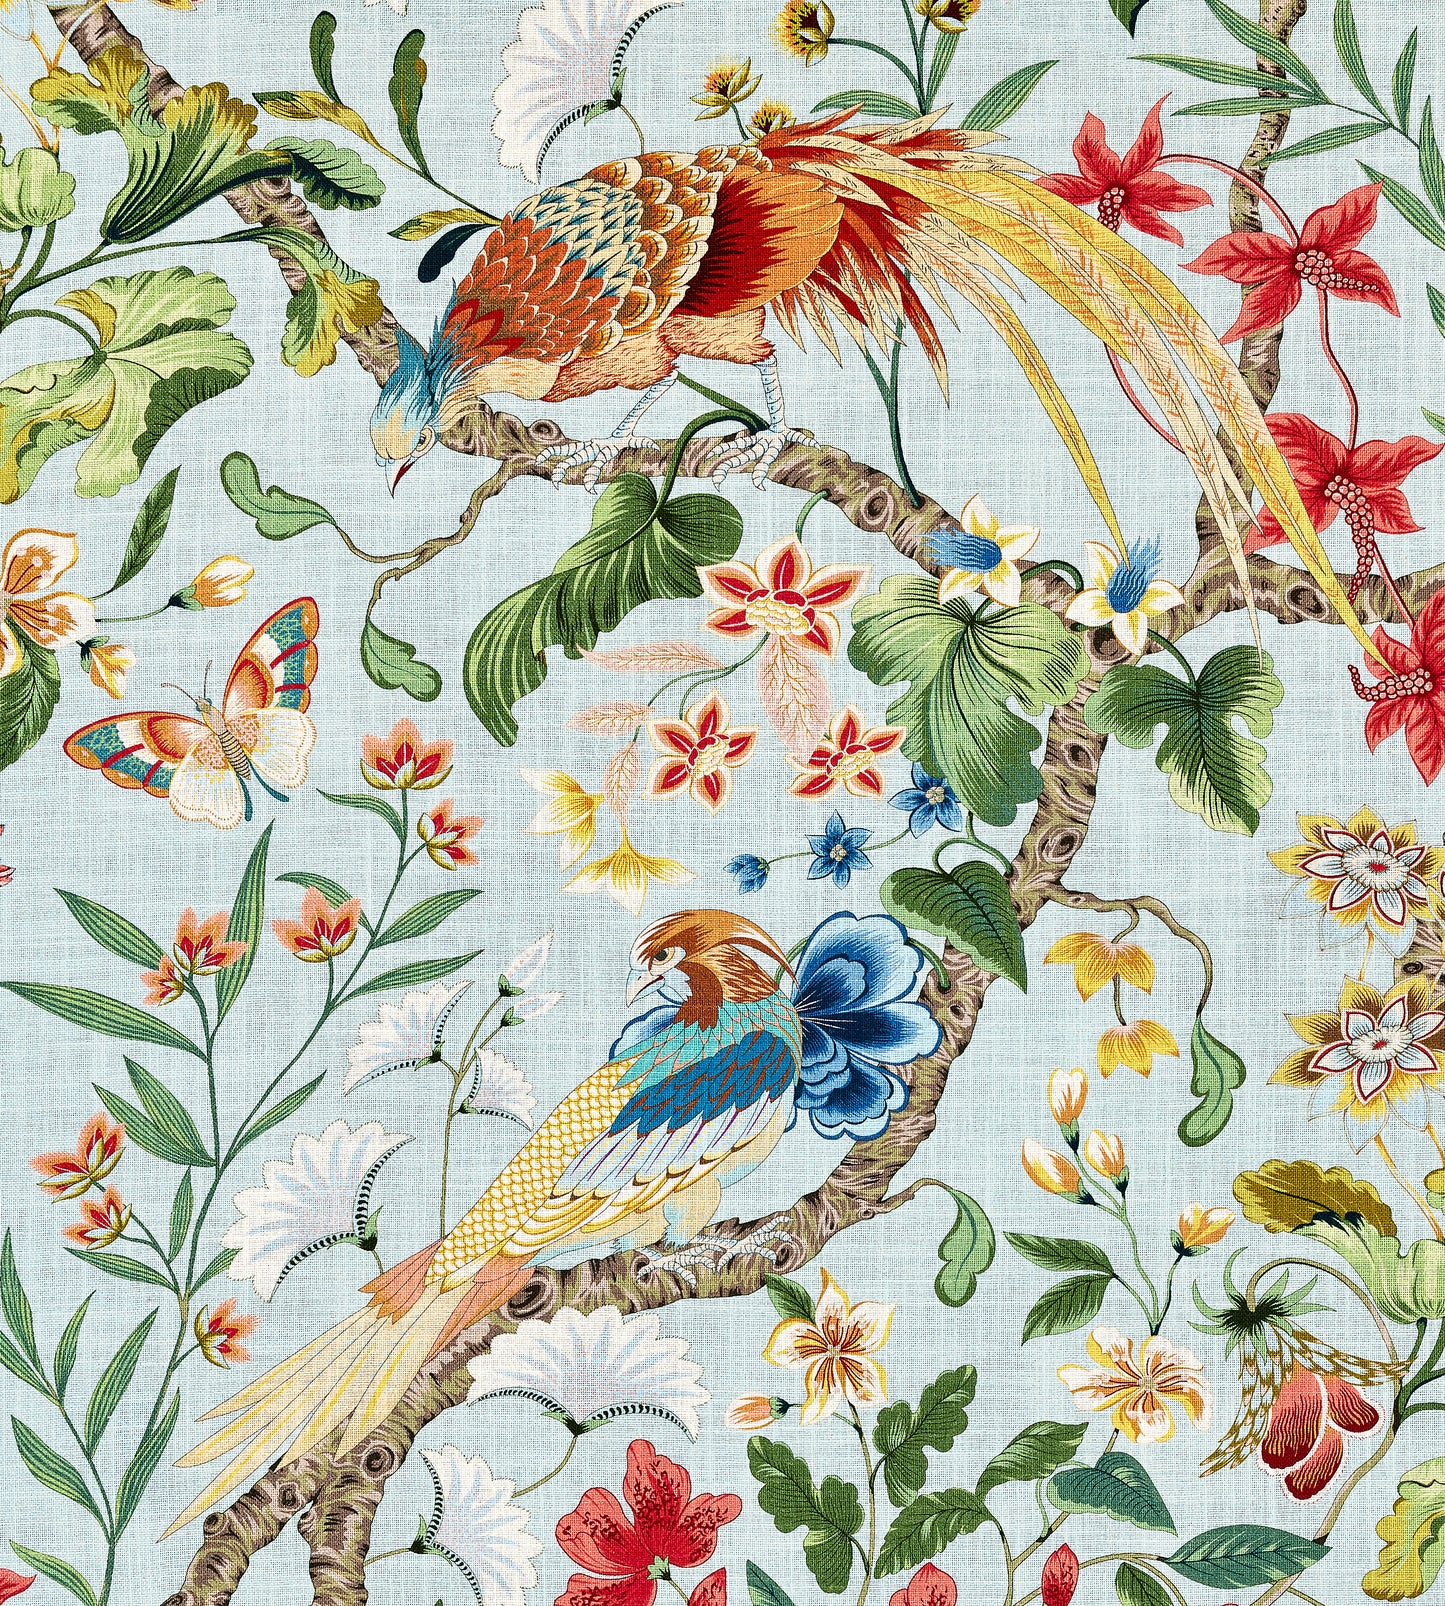 Purchase Old World Weavers Fabric Pattern number JP 00011340, Botany Bay Sky Multi 1